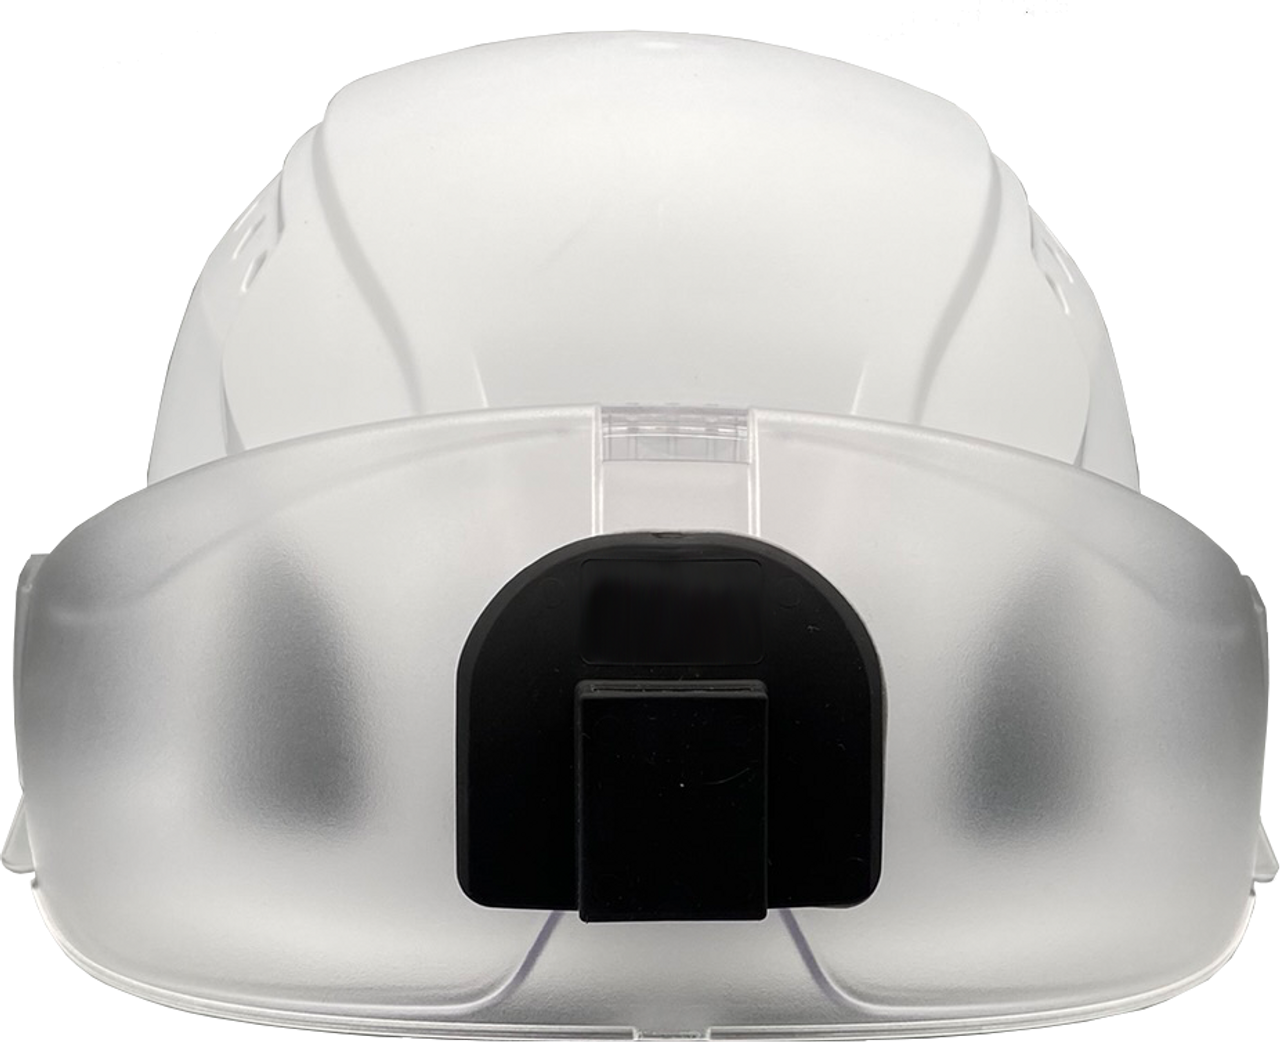 ZEKLER Head Protection  ZONE Helmet with  for ZEKLER Head Protection | ZONE Helmet Lamp Mount for Head Protection  that have  available in Australia and New Zealand